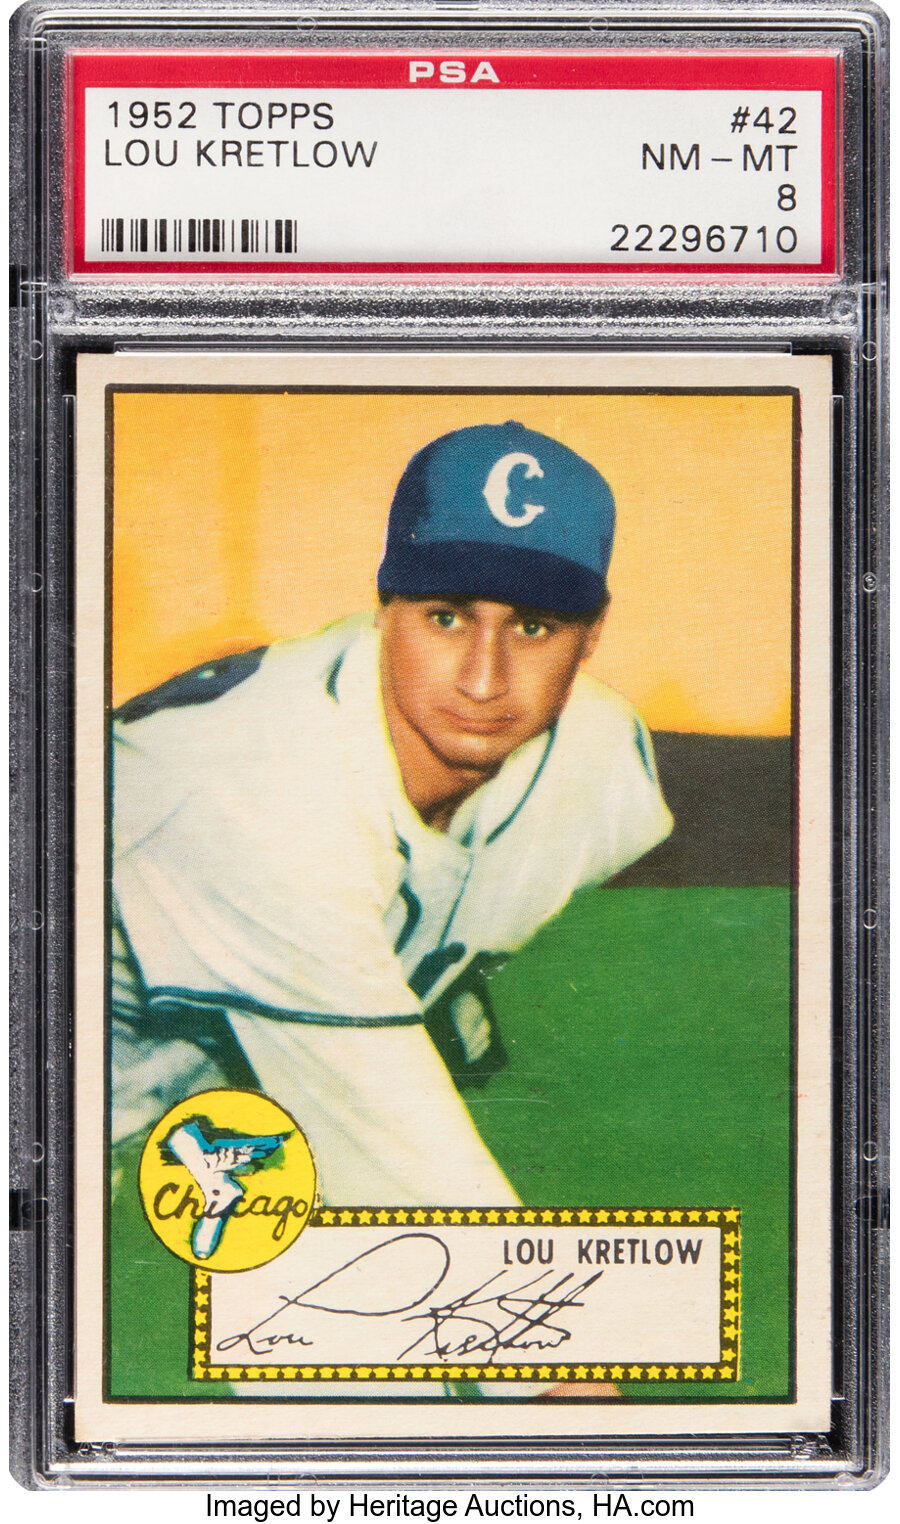 1952 Topps Lou Kretlow Rookie #42 PSA NM-MT 8 - Only One Higher!